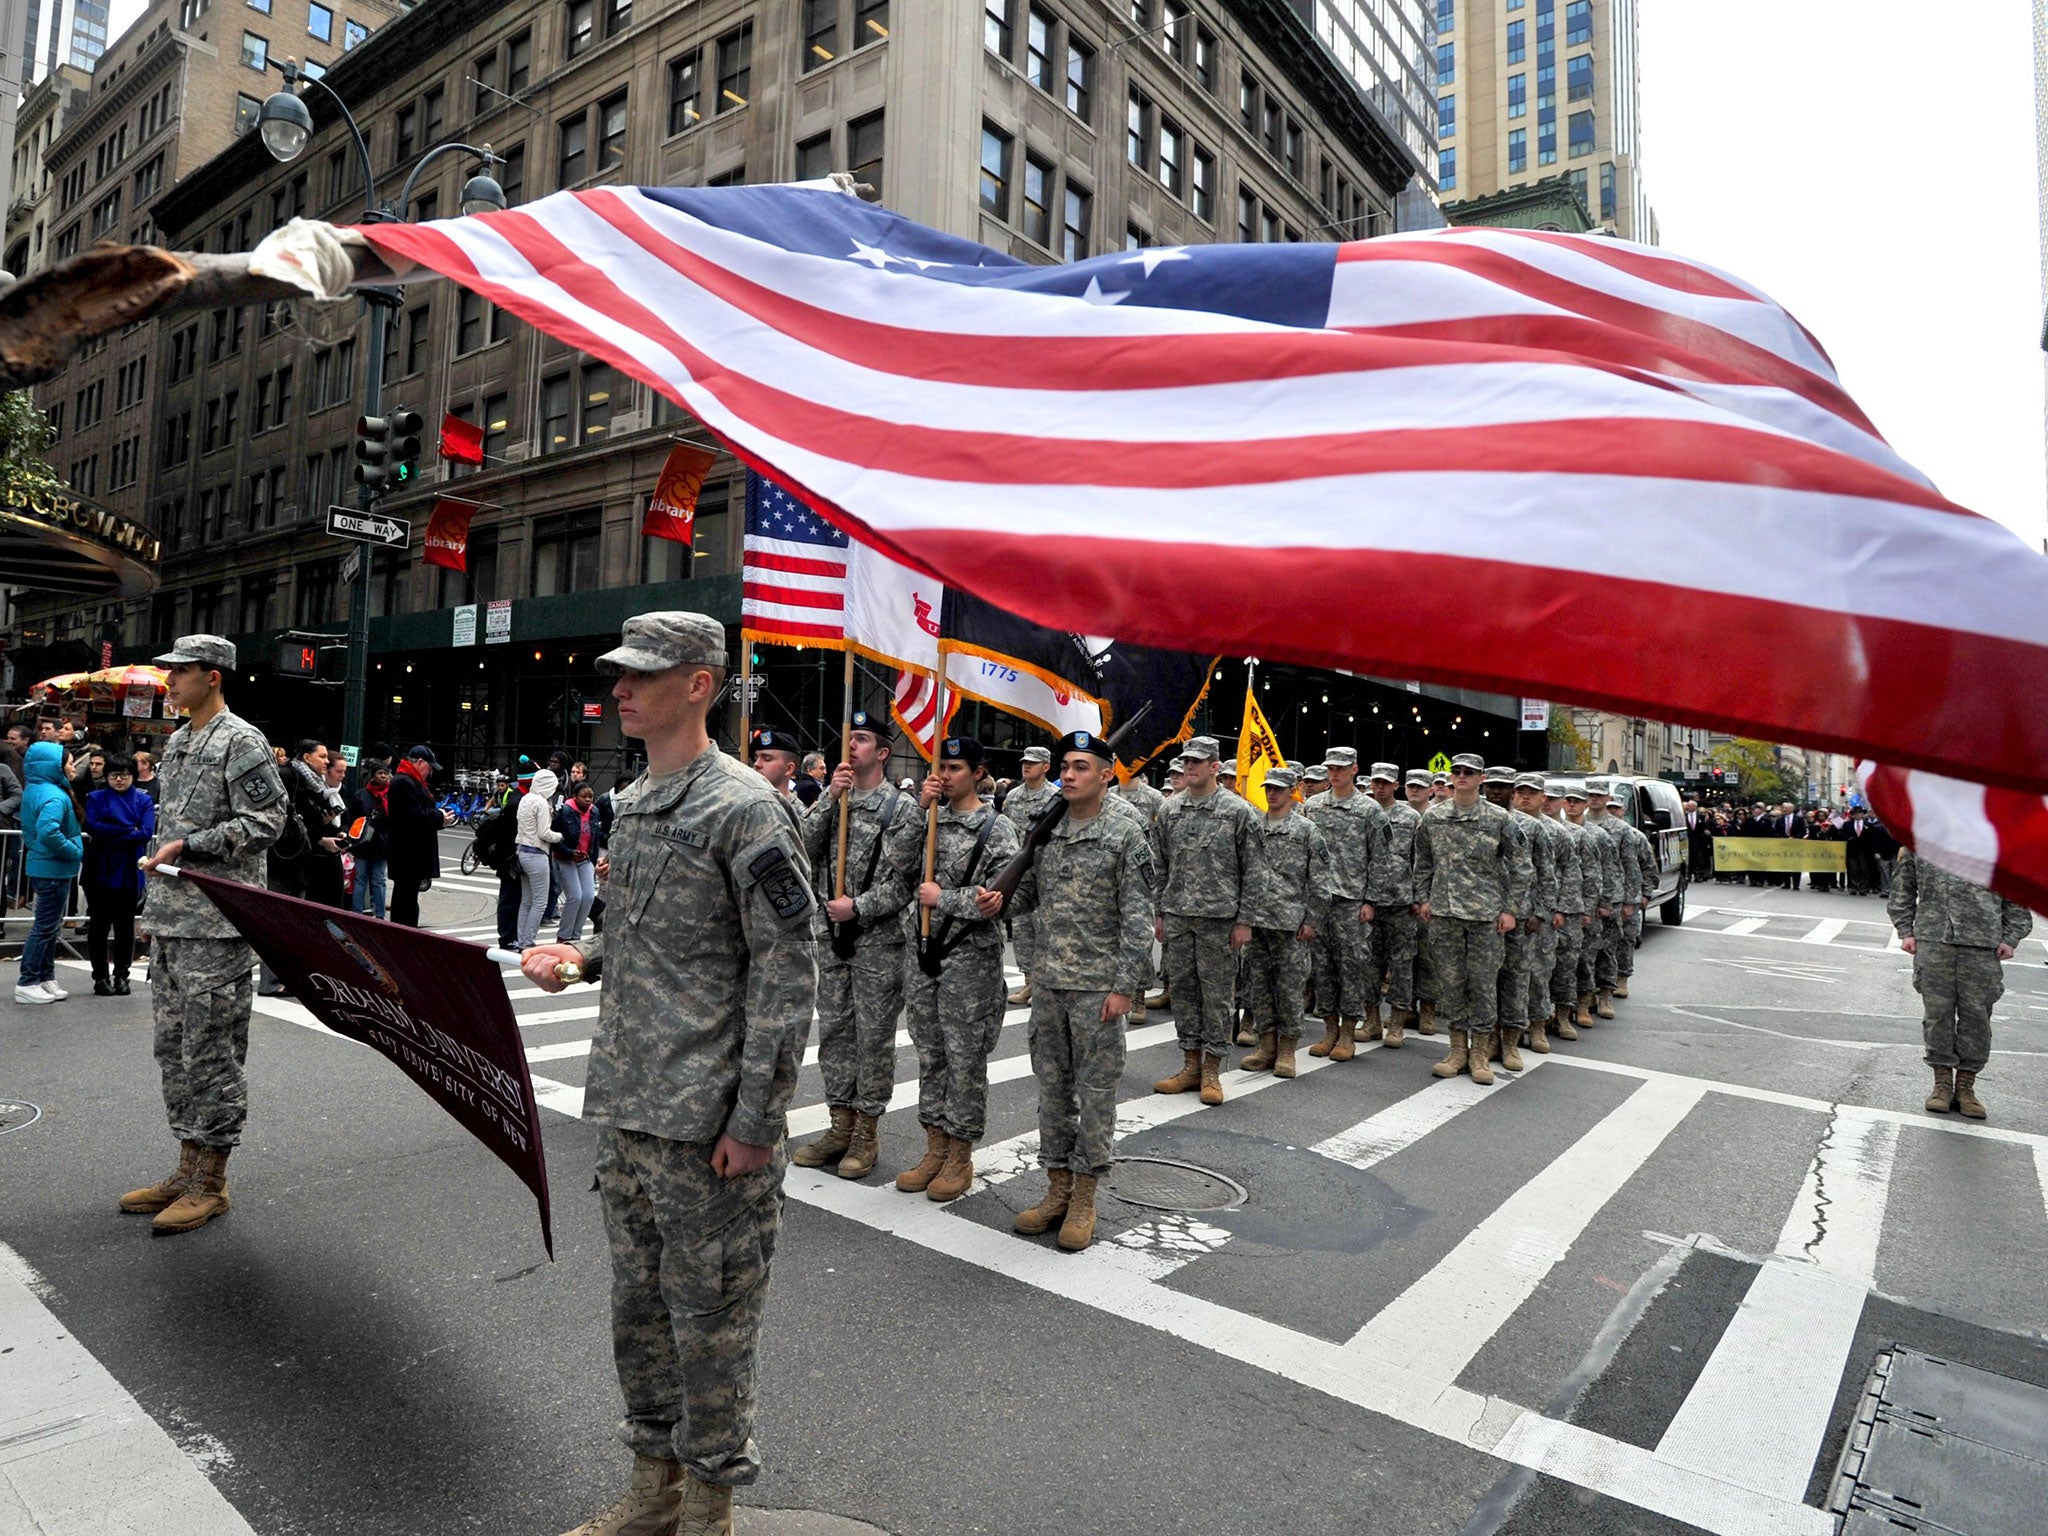 Members of the United States Armed Forces